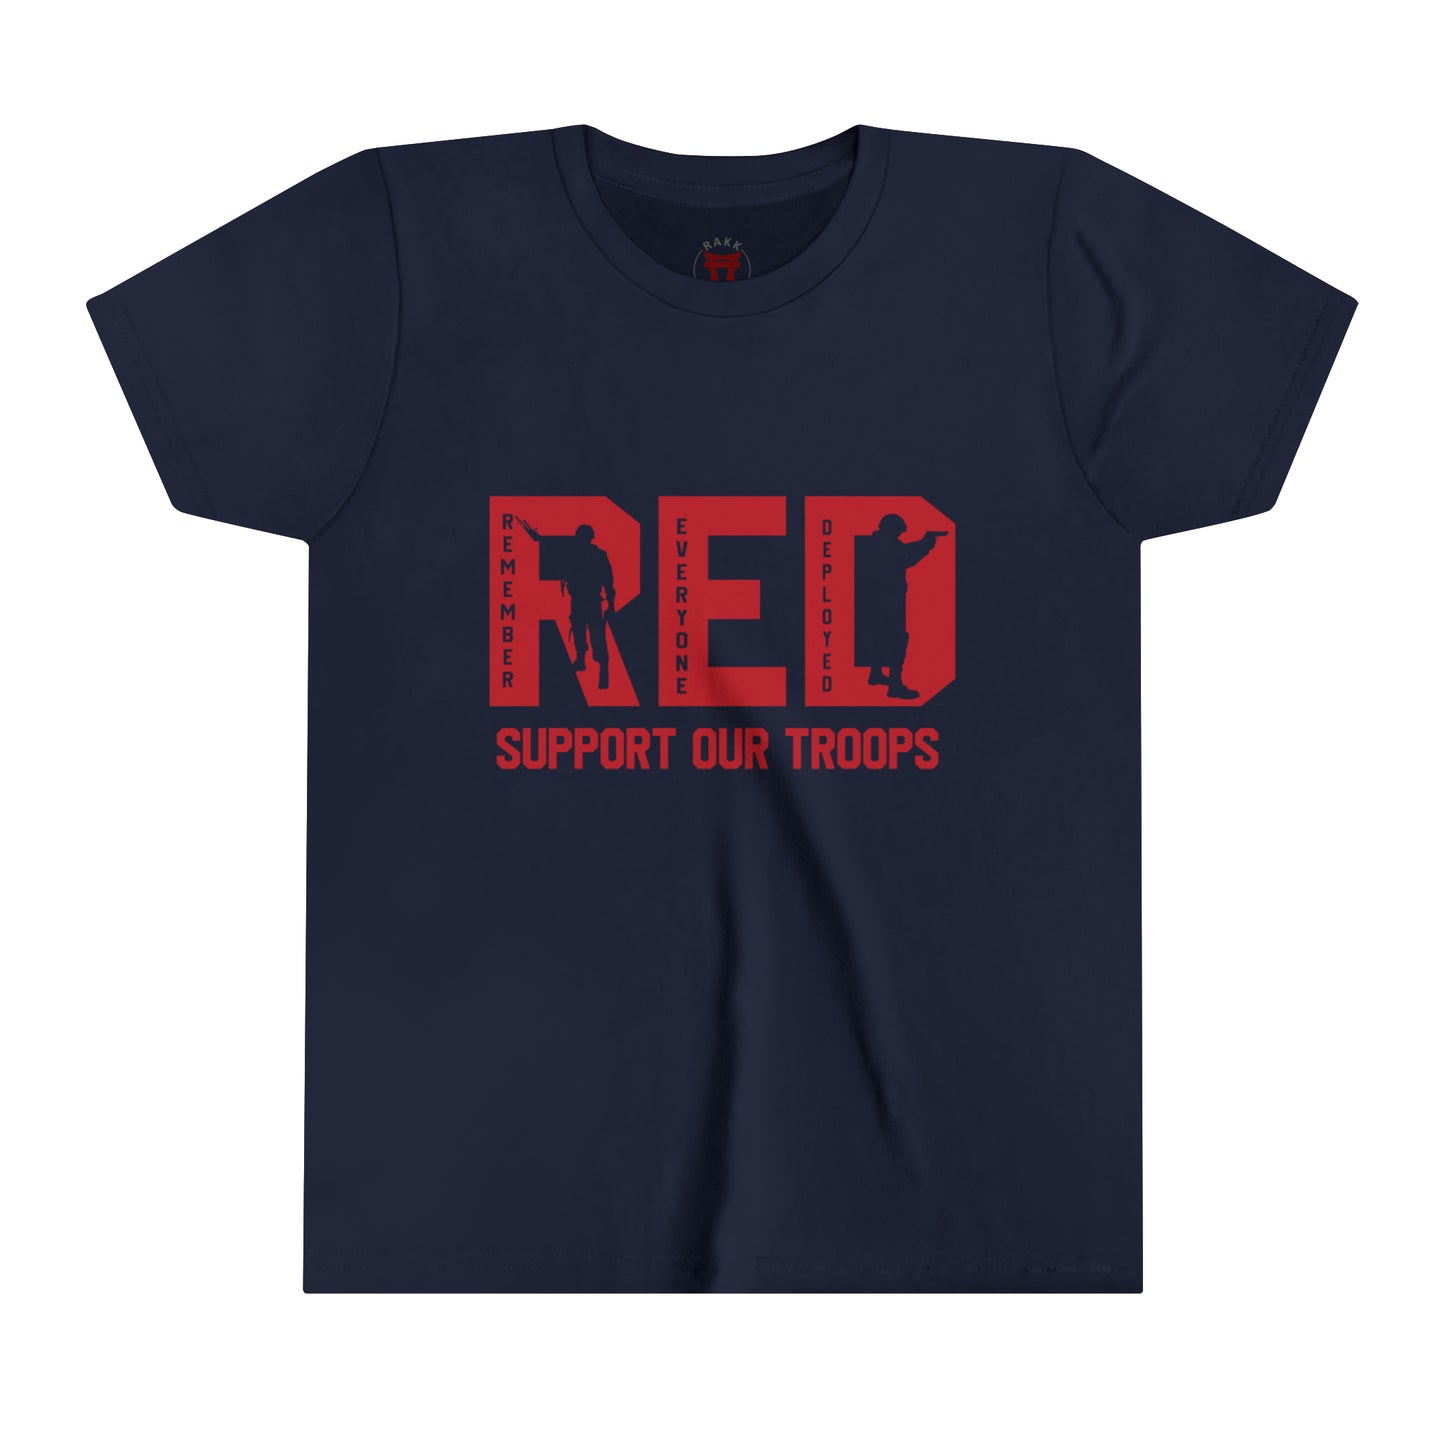 Rakkgear Youth "Remember Everyone Deployed" Blue Tee: Black t-shirt featuring RED letters with 'Support Our Troops' on the front. Iconic Rakkgear Logo on the upper back.